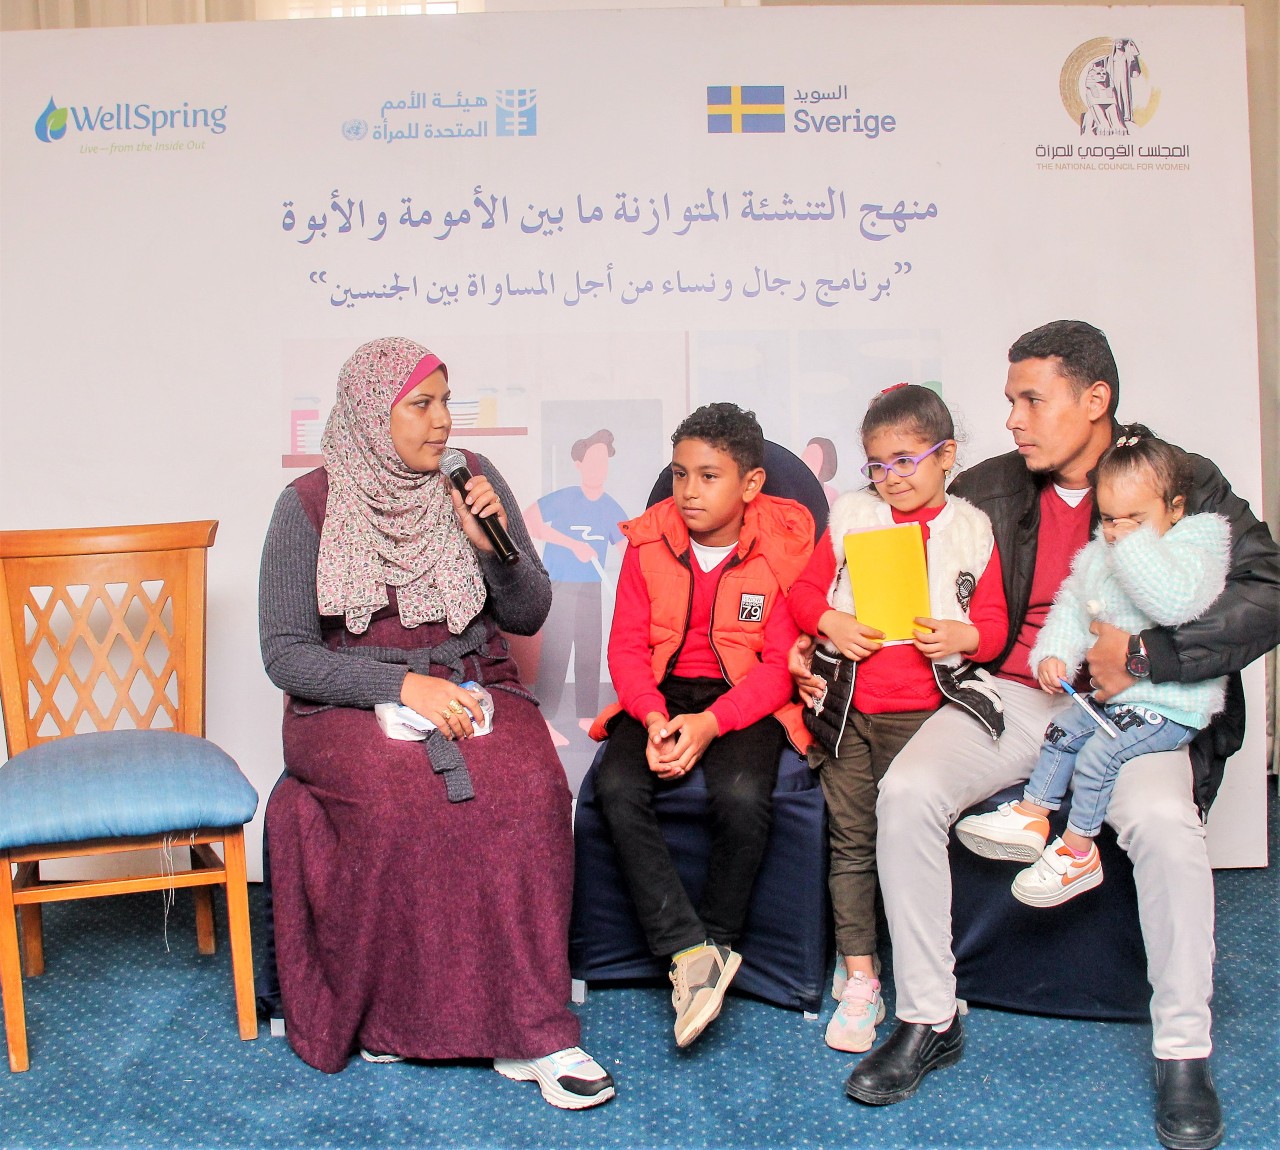 Iman Gabr during her participation with her family in one of the activities at the family camp that was held in Alexandria from 9 to 10 December 2021. Photo: UN Women/Dalia Amin